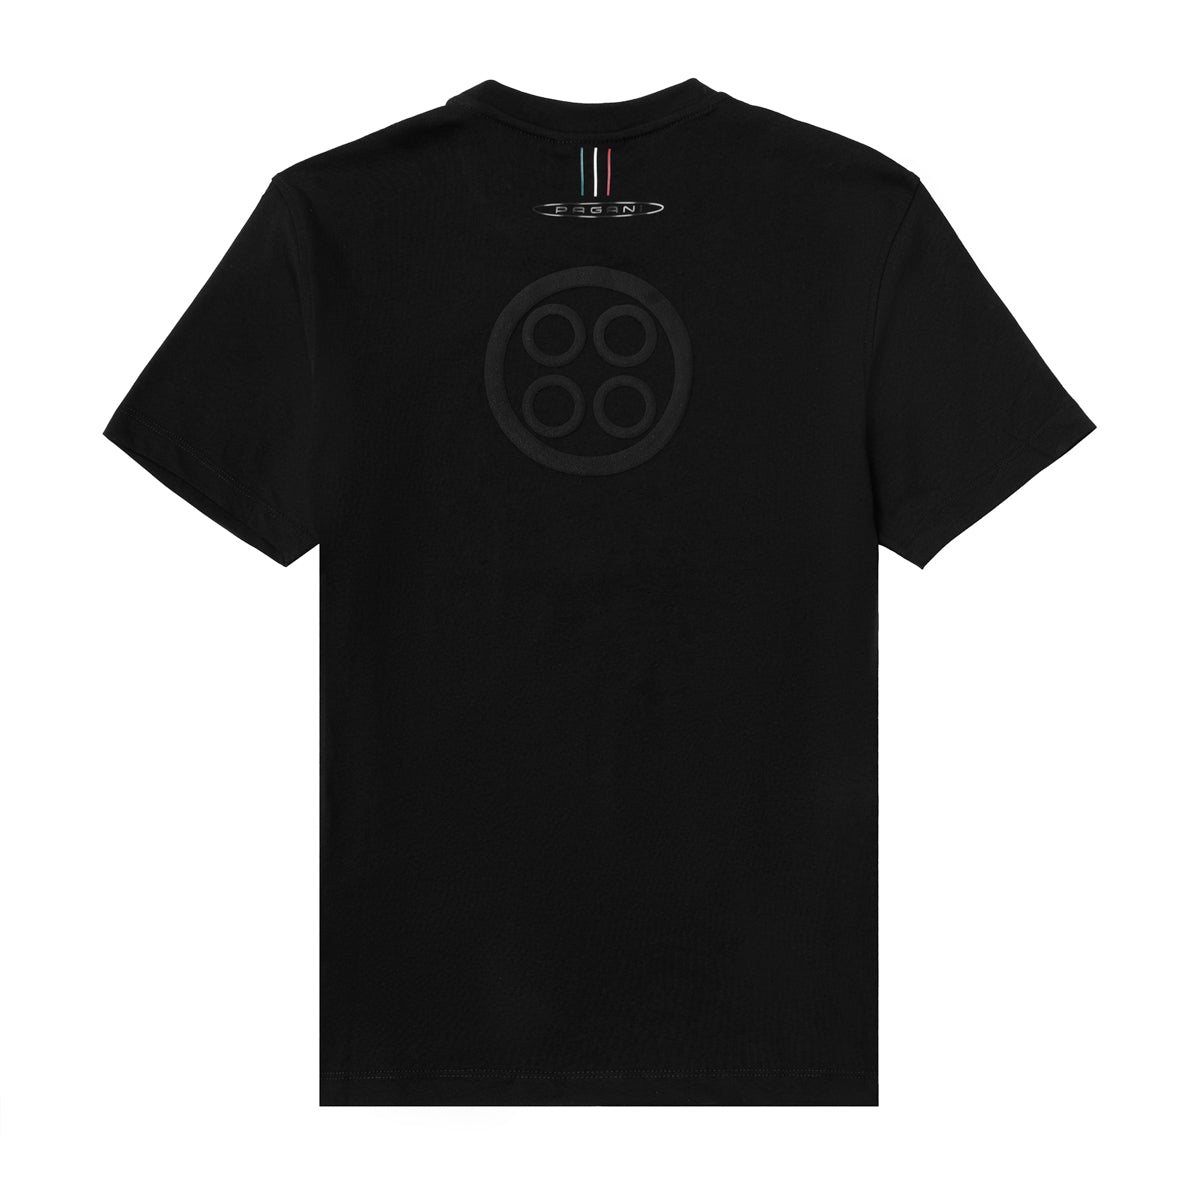 T-shirt uomo logo laterale nera | Team Collection